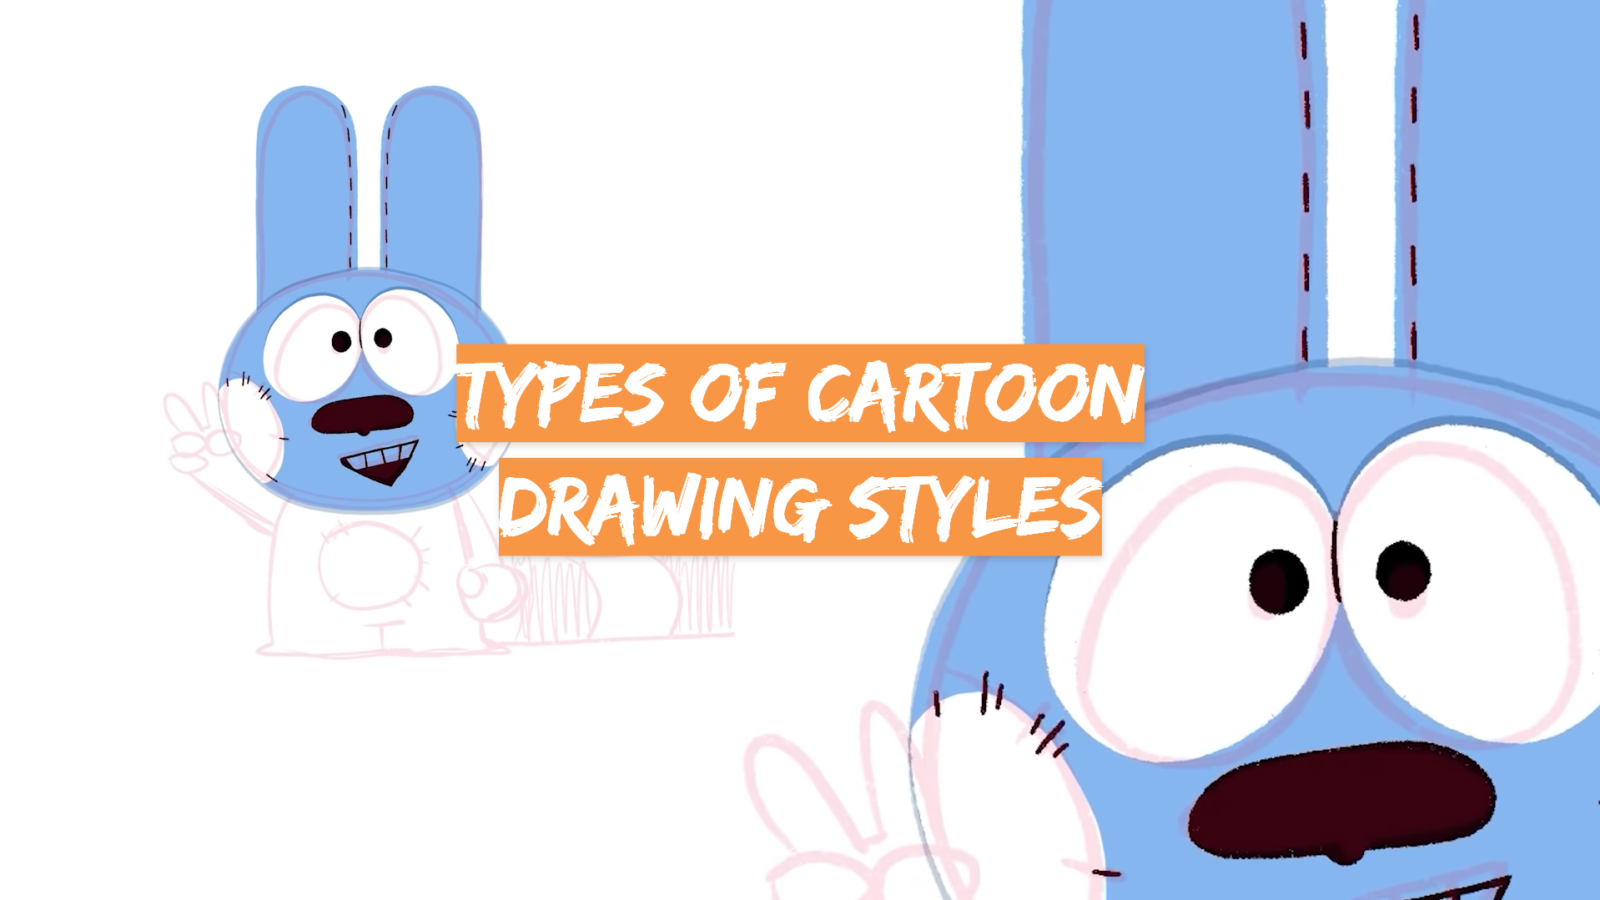 Types of Cartoon Drawing Styles